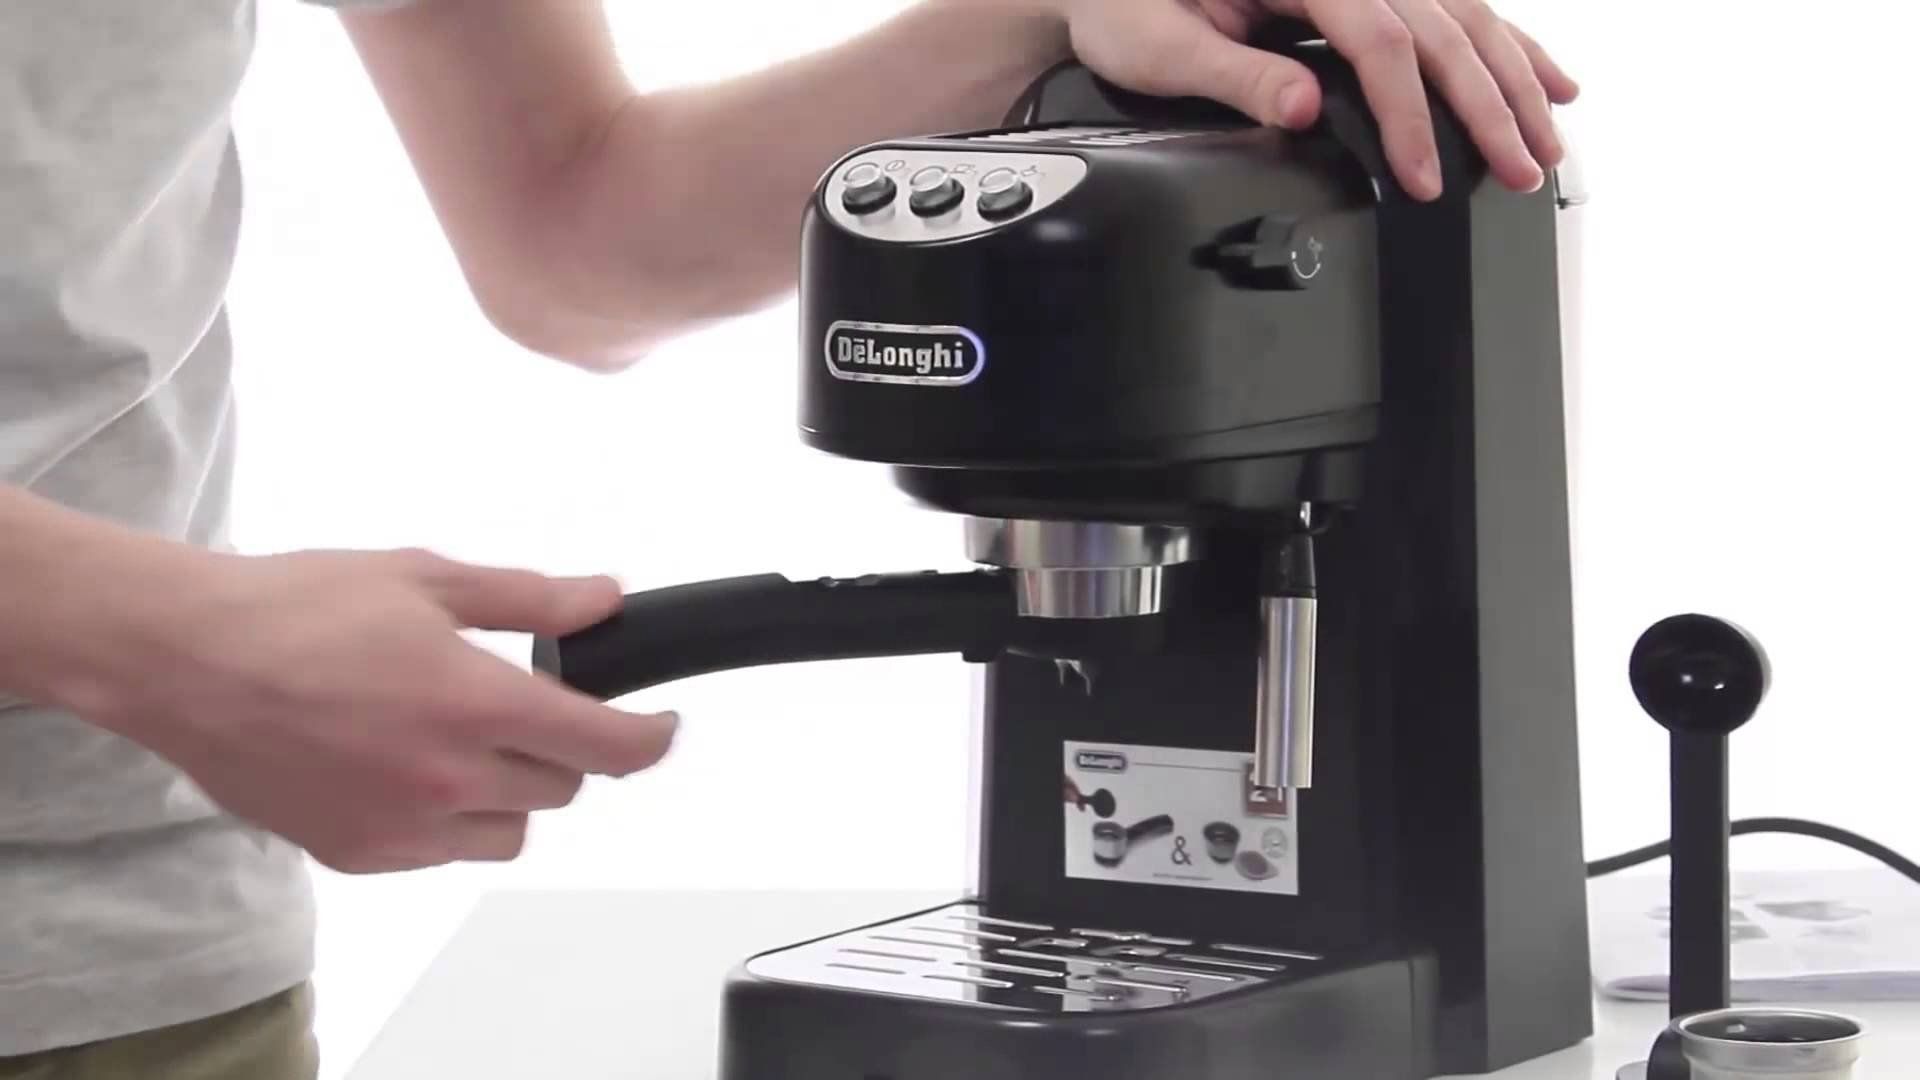 The best De'Longhi coffee machines for home and office in 2022